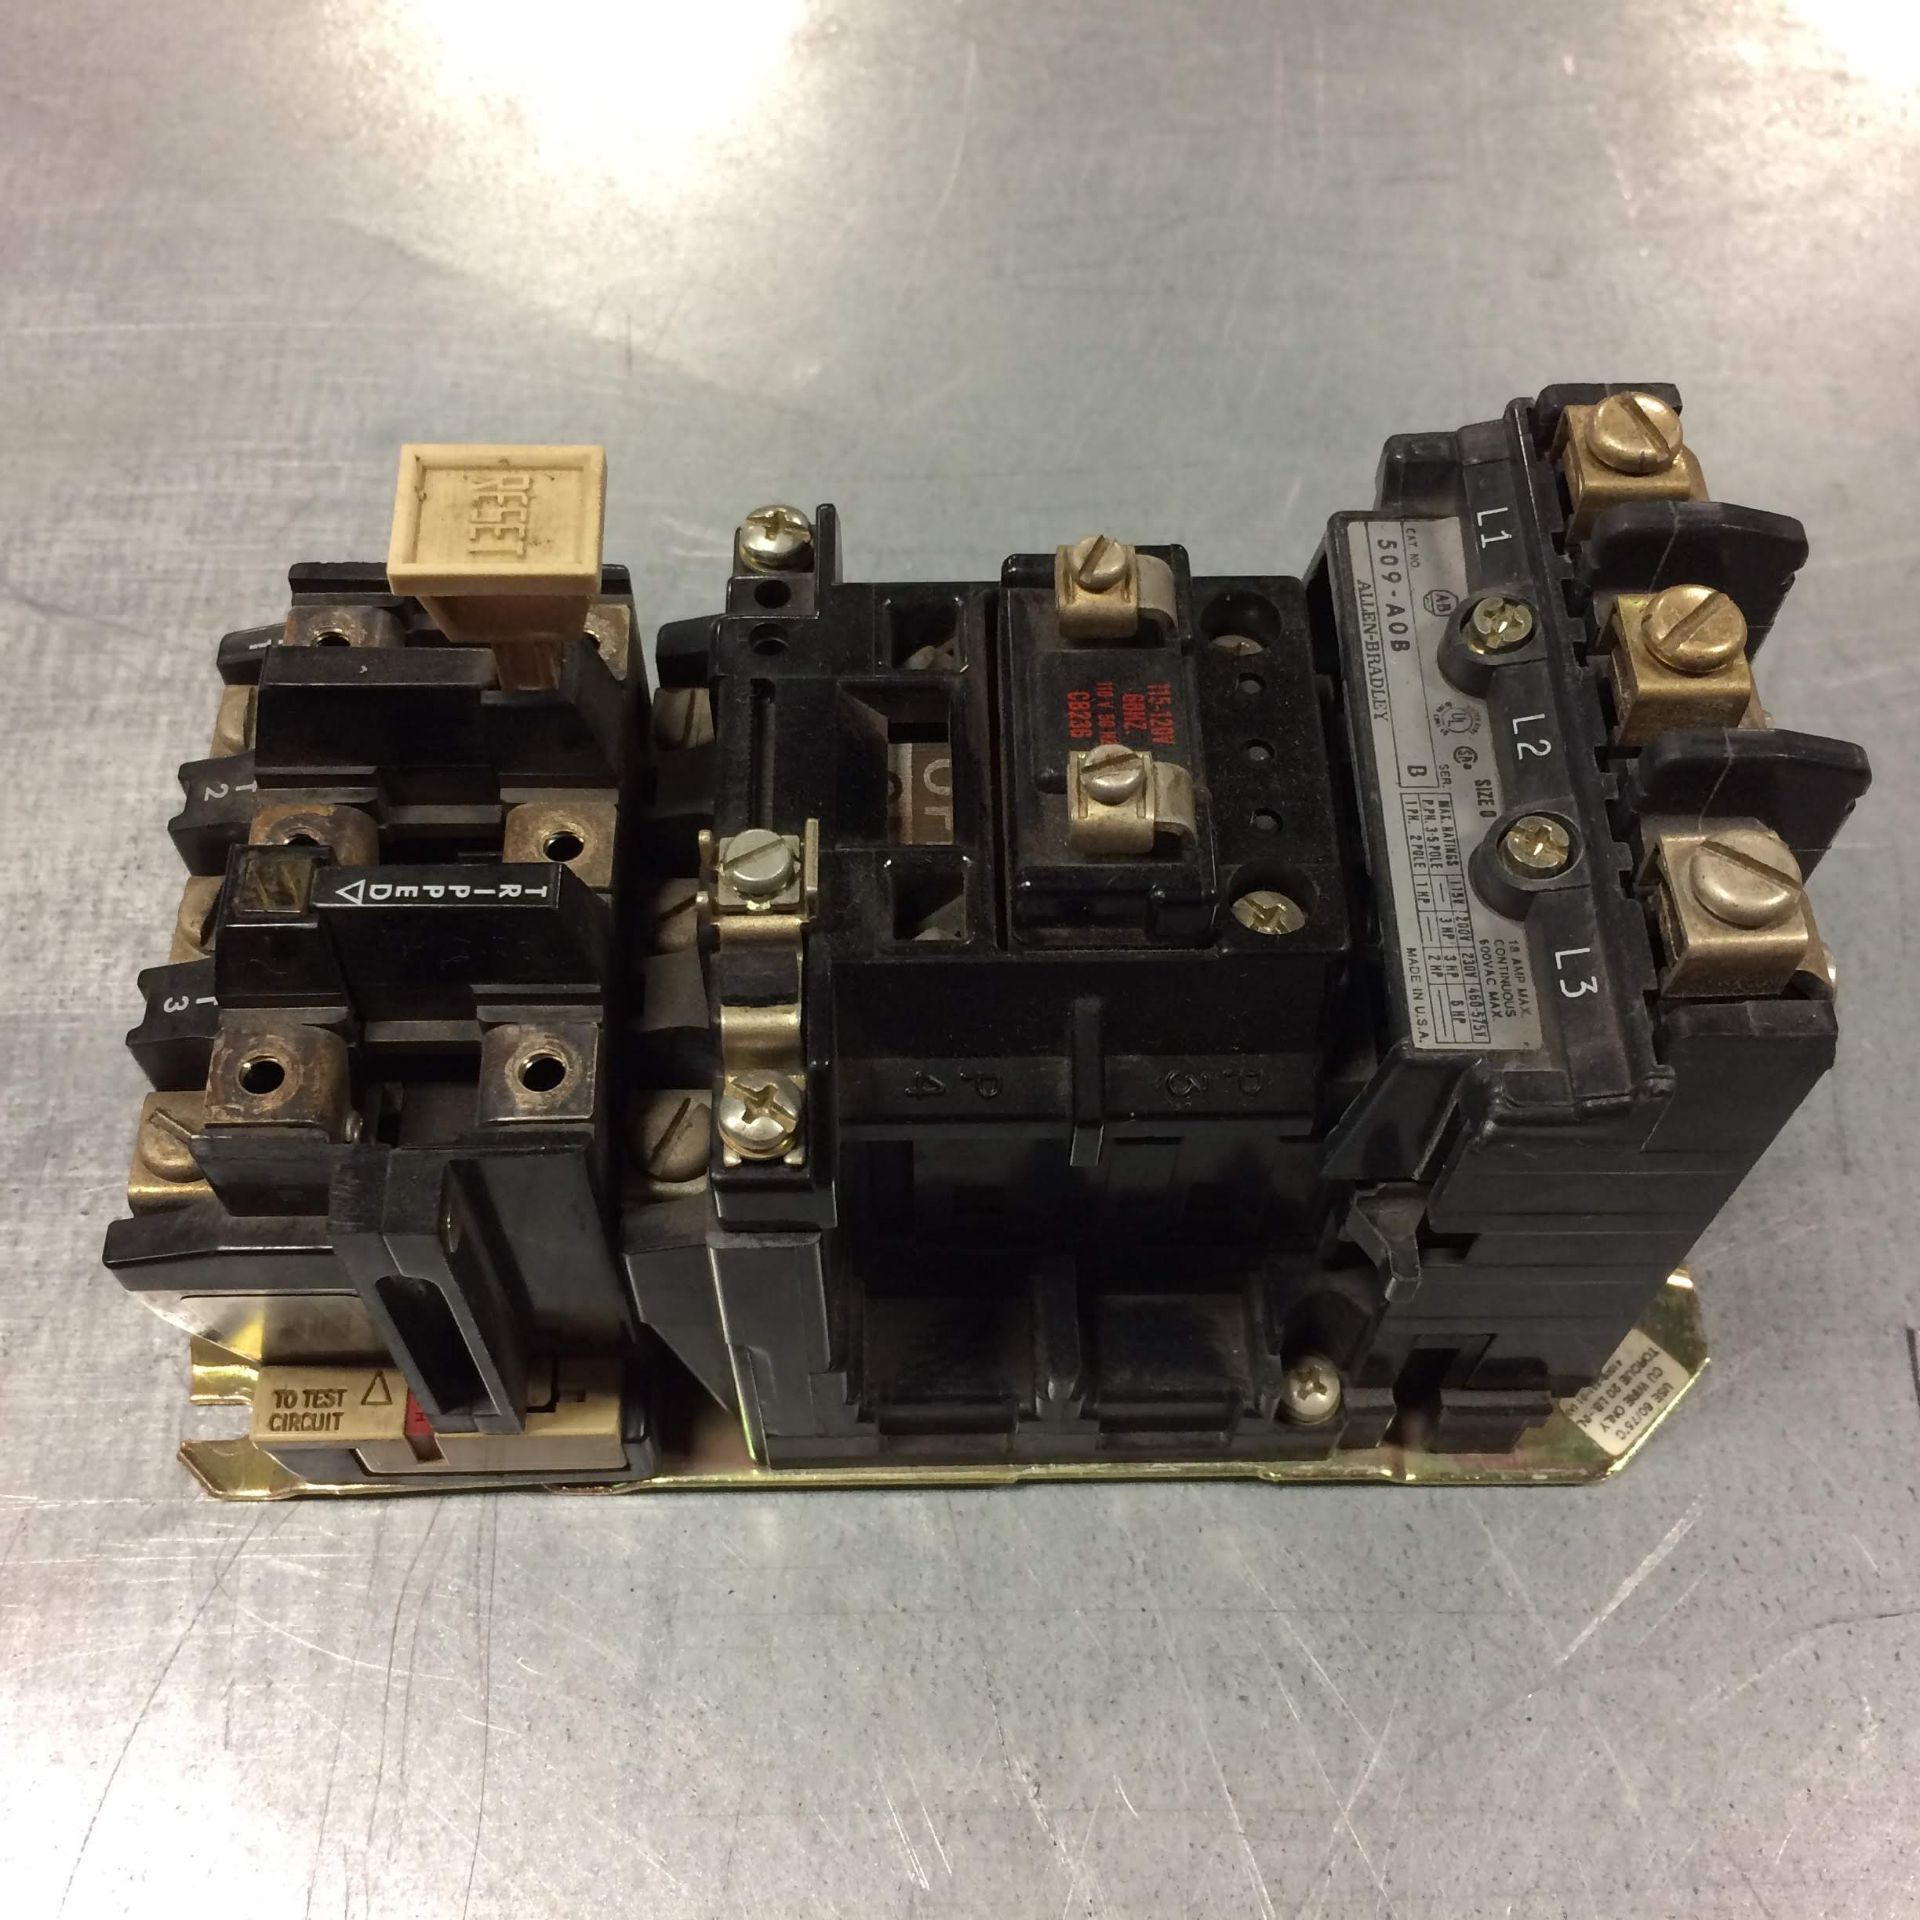 (1) 509-A0B ALLEN BRADLEY MOTOR STARTER USED Pickup your lot(s) for free! Shipping is available